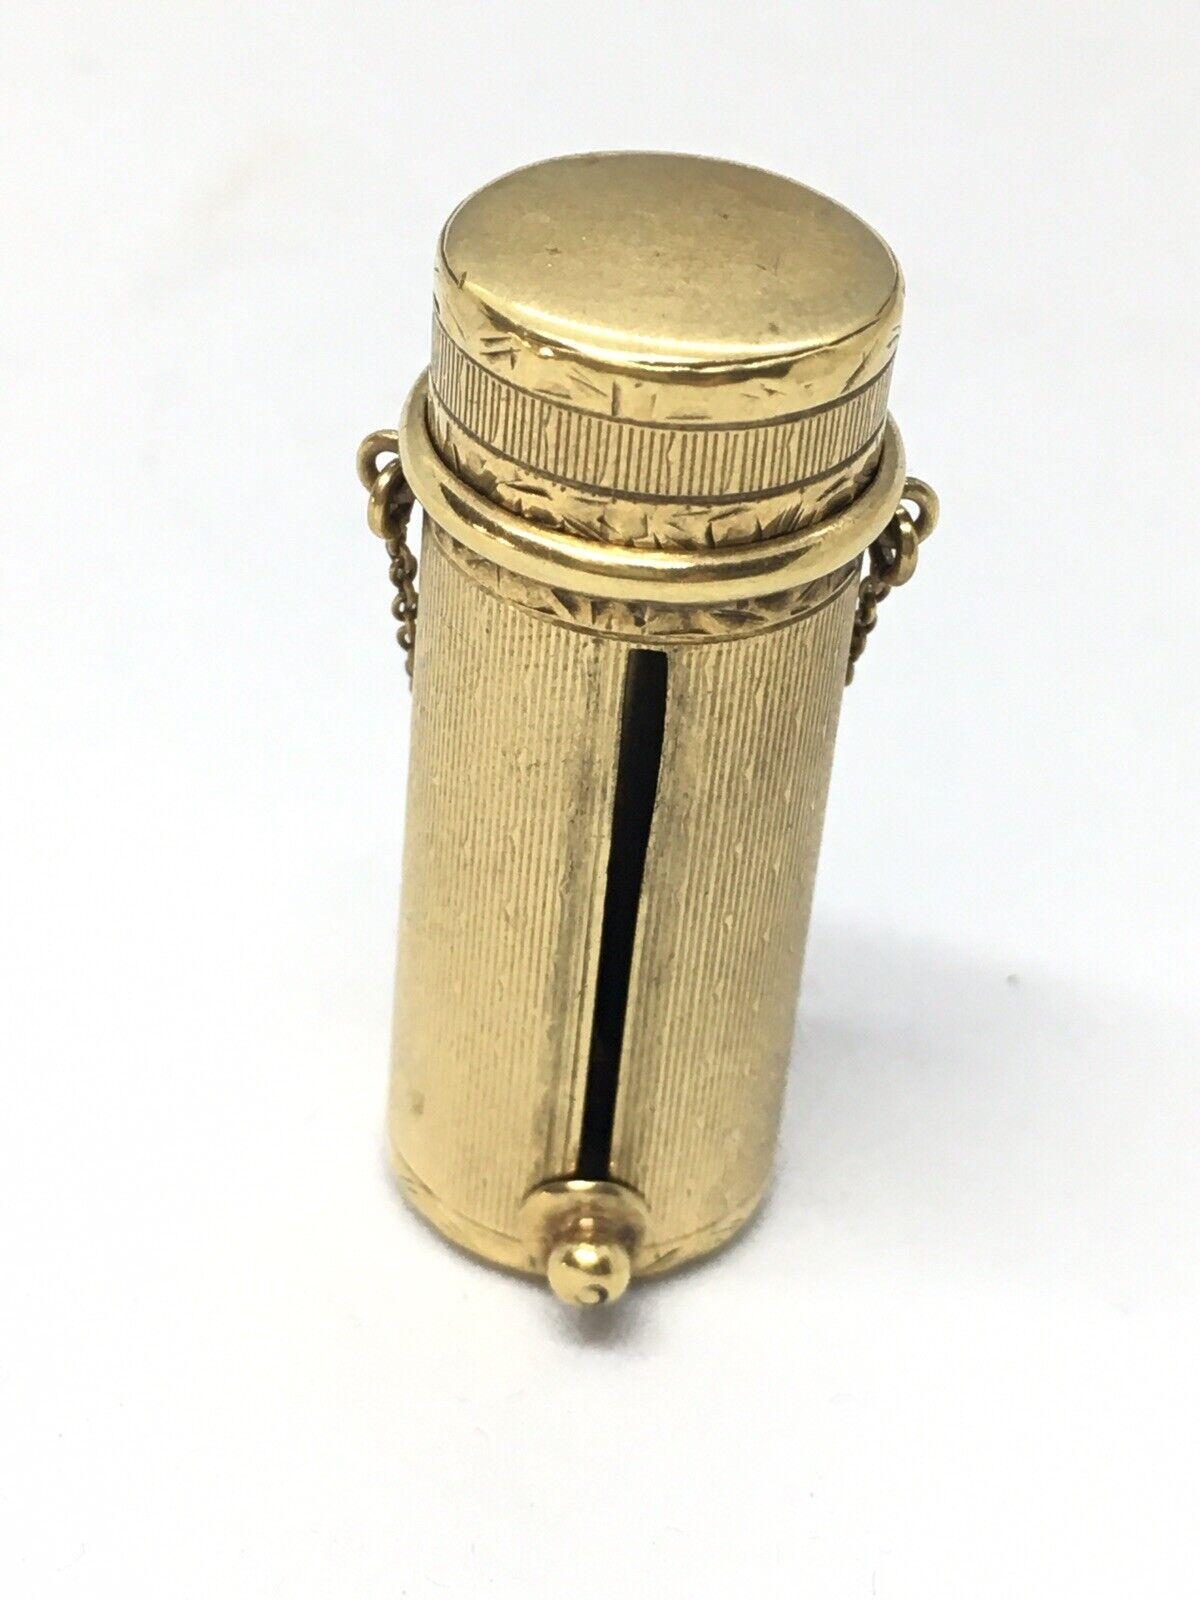 14K Gold Art DecoTiffany & Co Antique Lipstick Holder Case 1930s

11.8 gram
Marked '14K Tiffany & Co '
1 3/4 inch tall
1/2 inch diameter
Show of wear and tear in consistence with 90 Yrs of age, see pictures